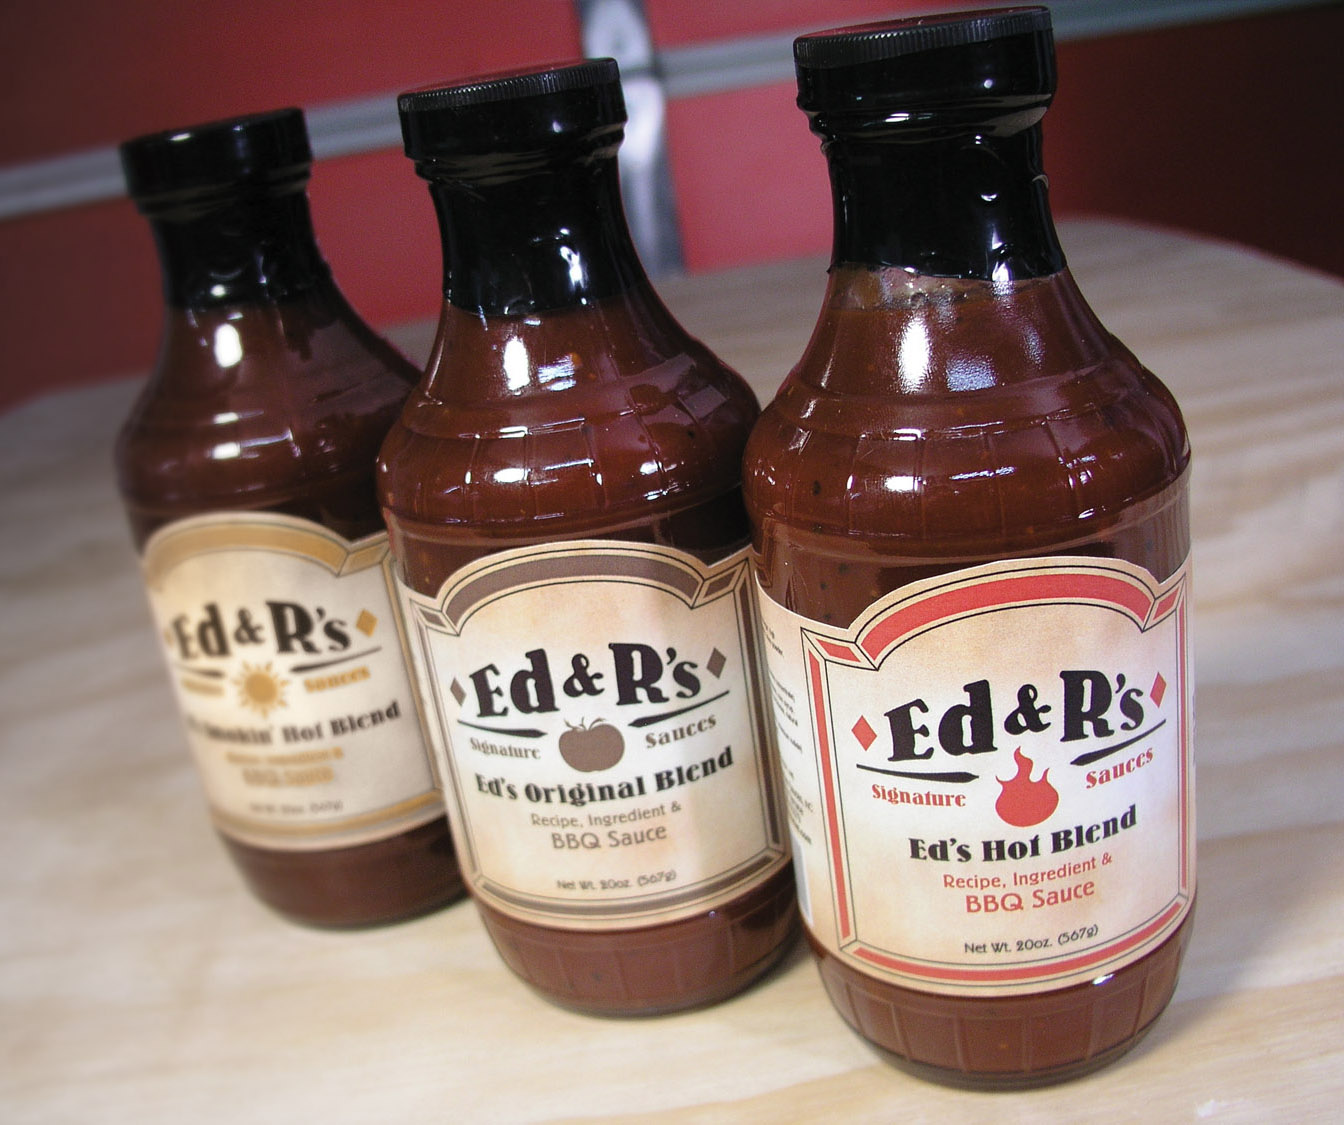 Twin Cities packaging design for Ed n Rs Barbecue Sauce bottle labels